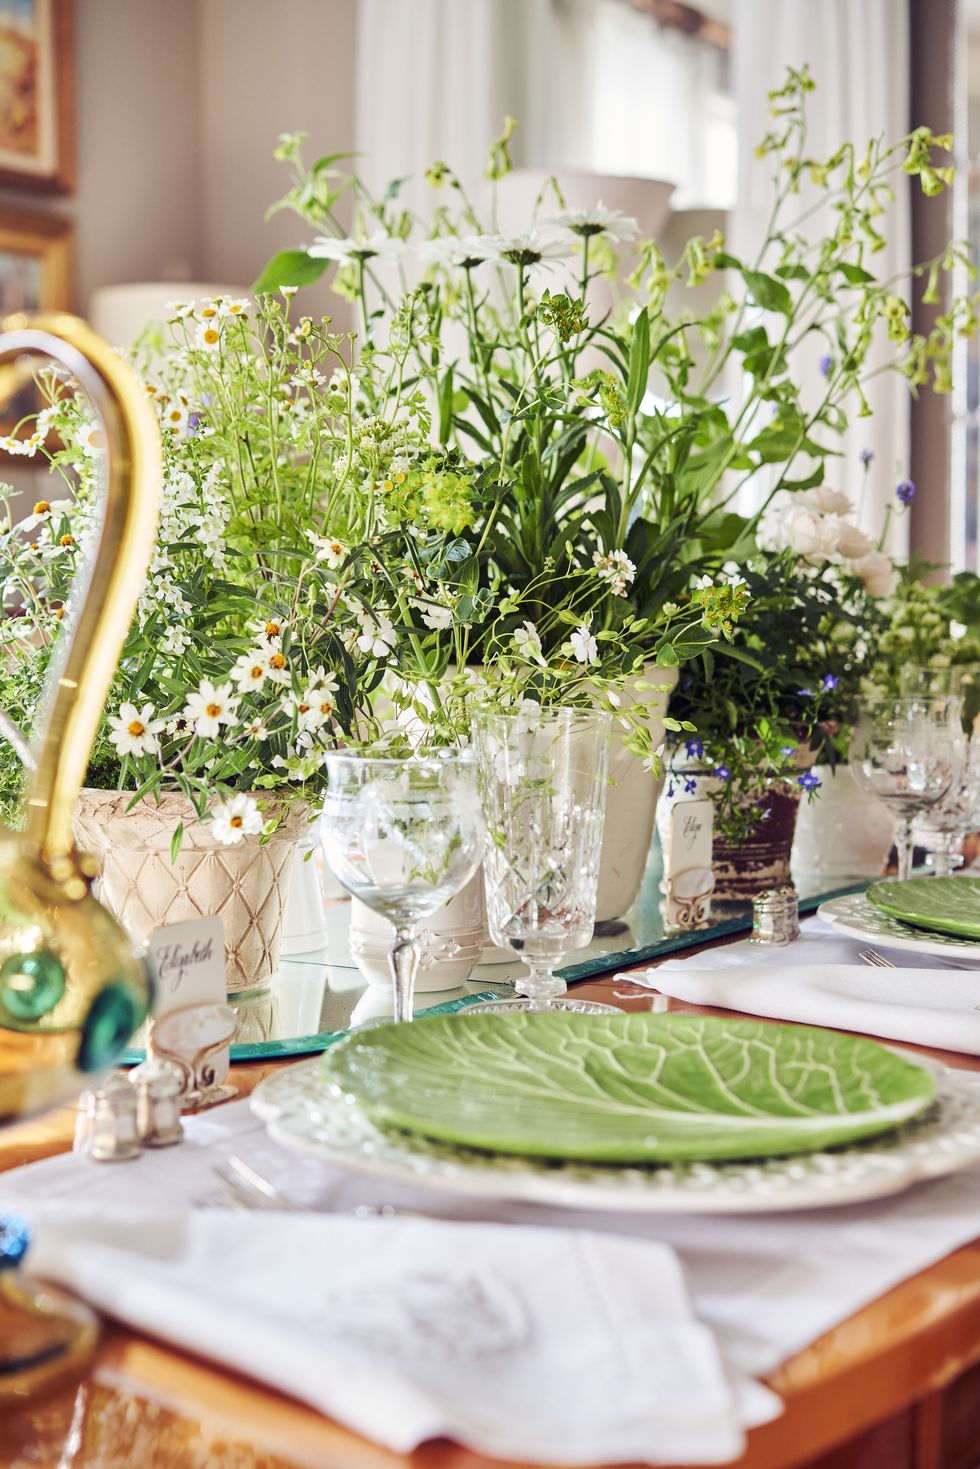 40 Best Table Decorating Ideas for Every Occasion